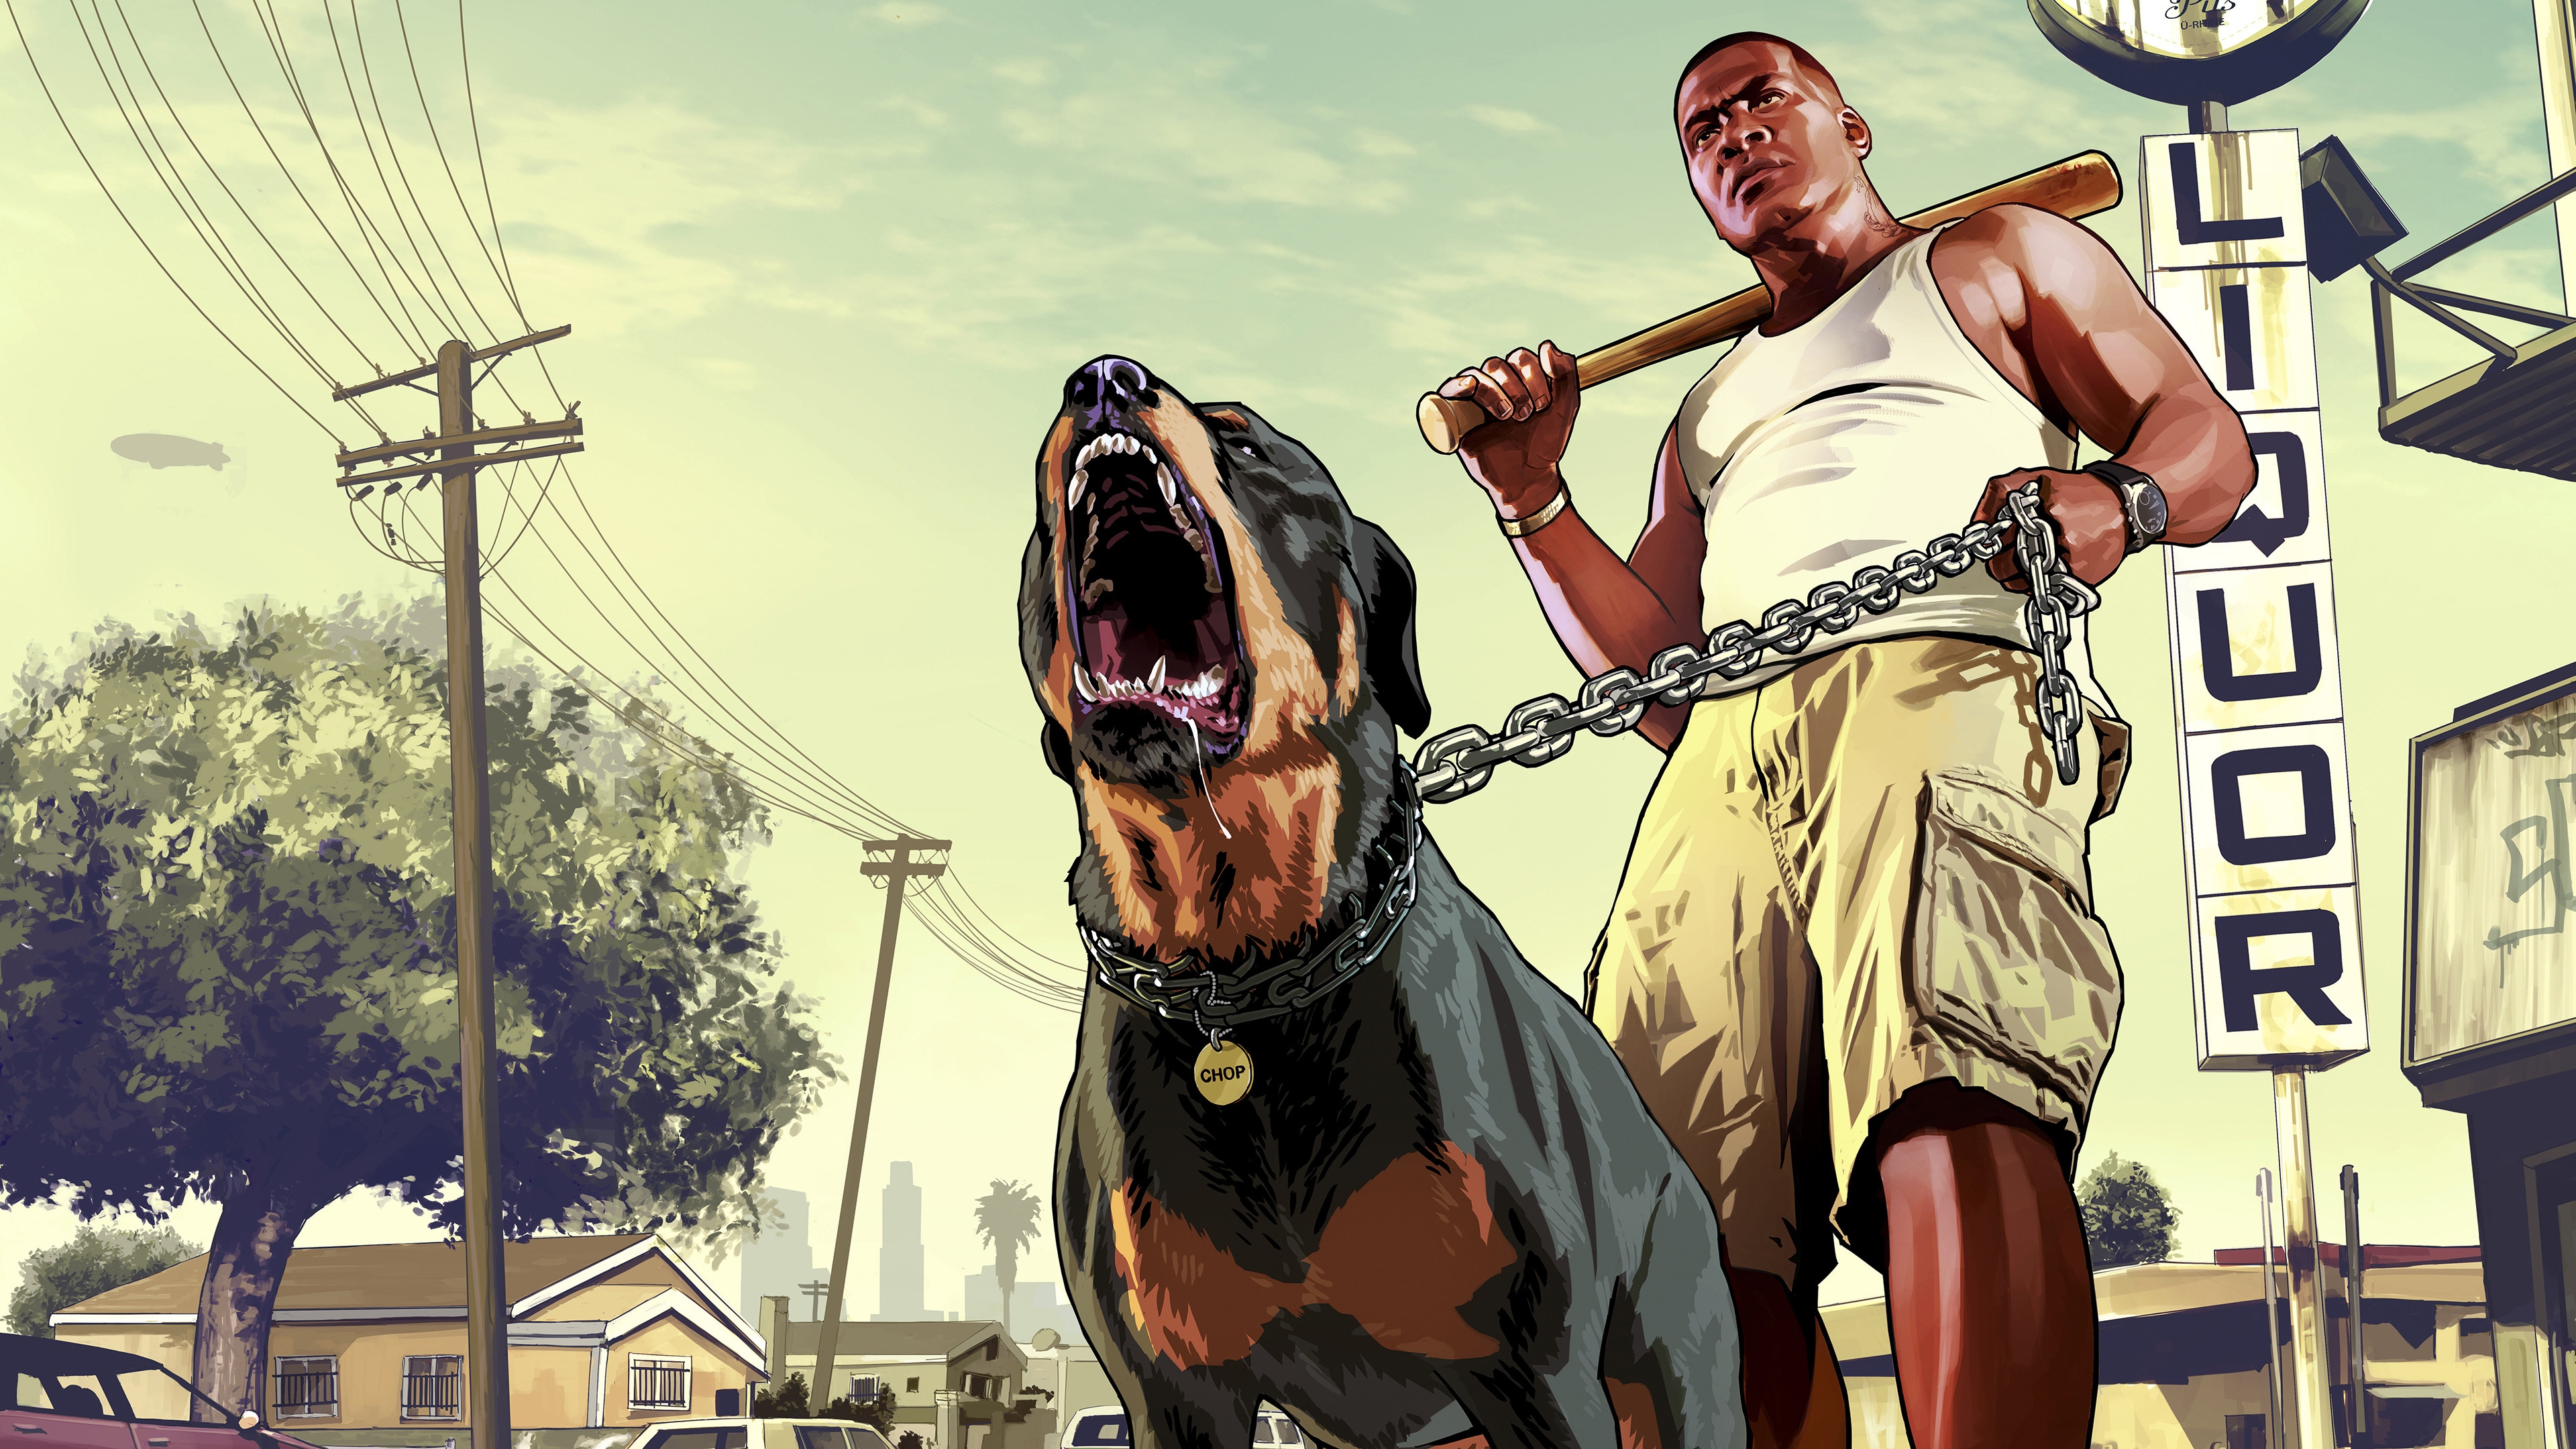 Franklin with his Dog GTA 5 for 3840 x 2160 Ultra HD resolution